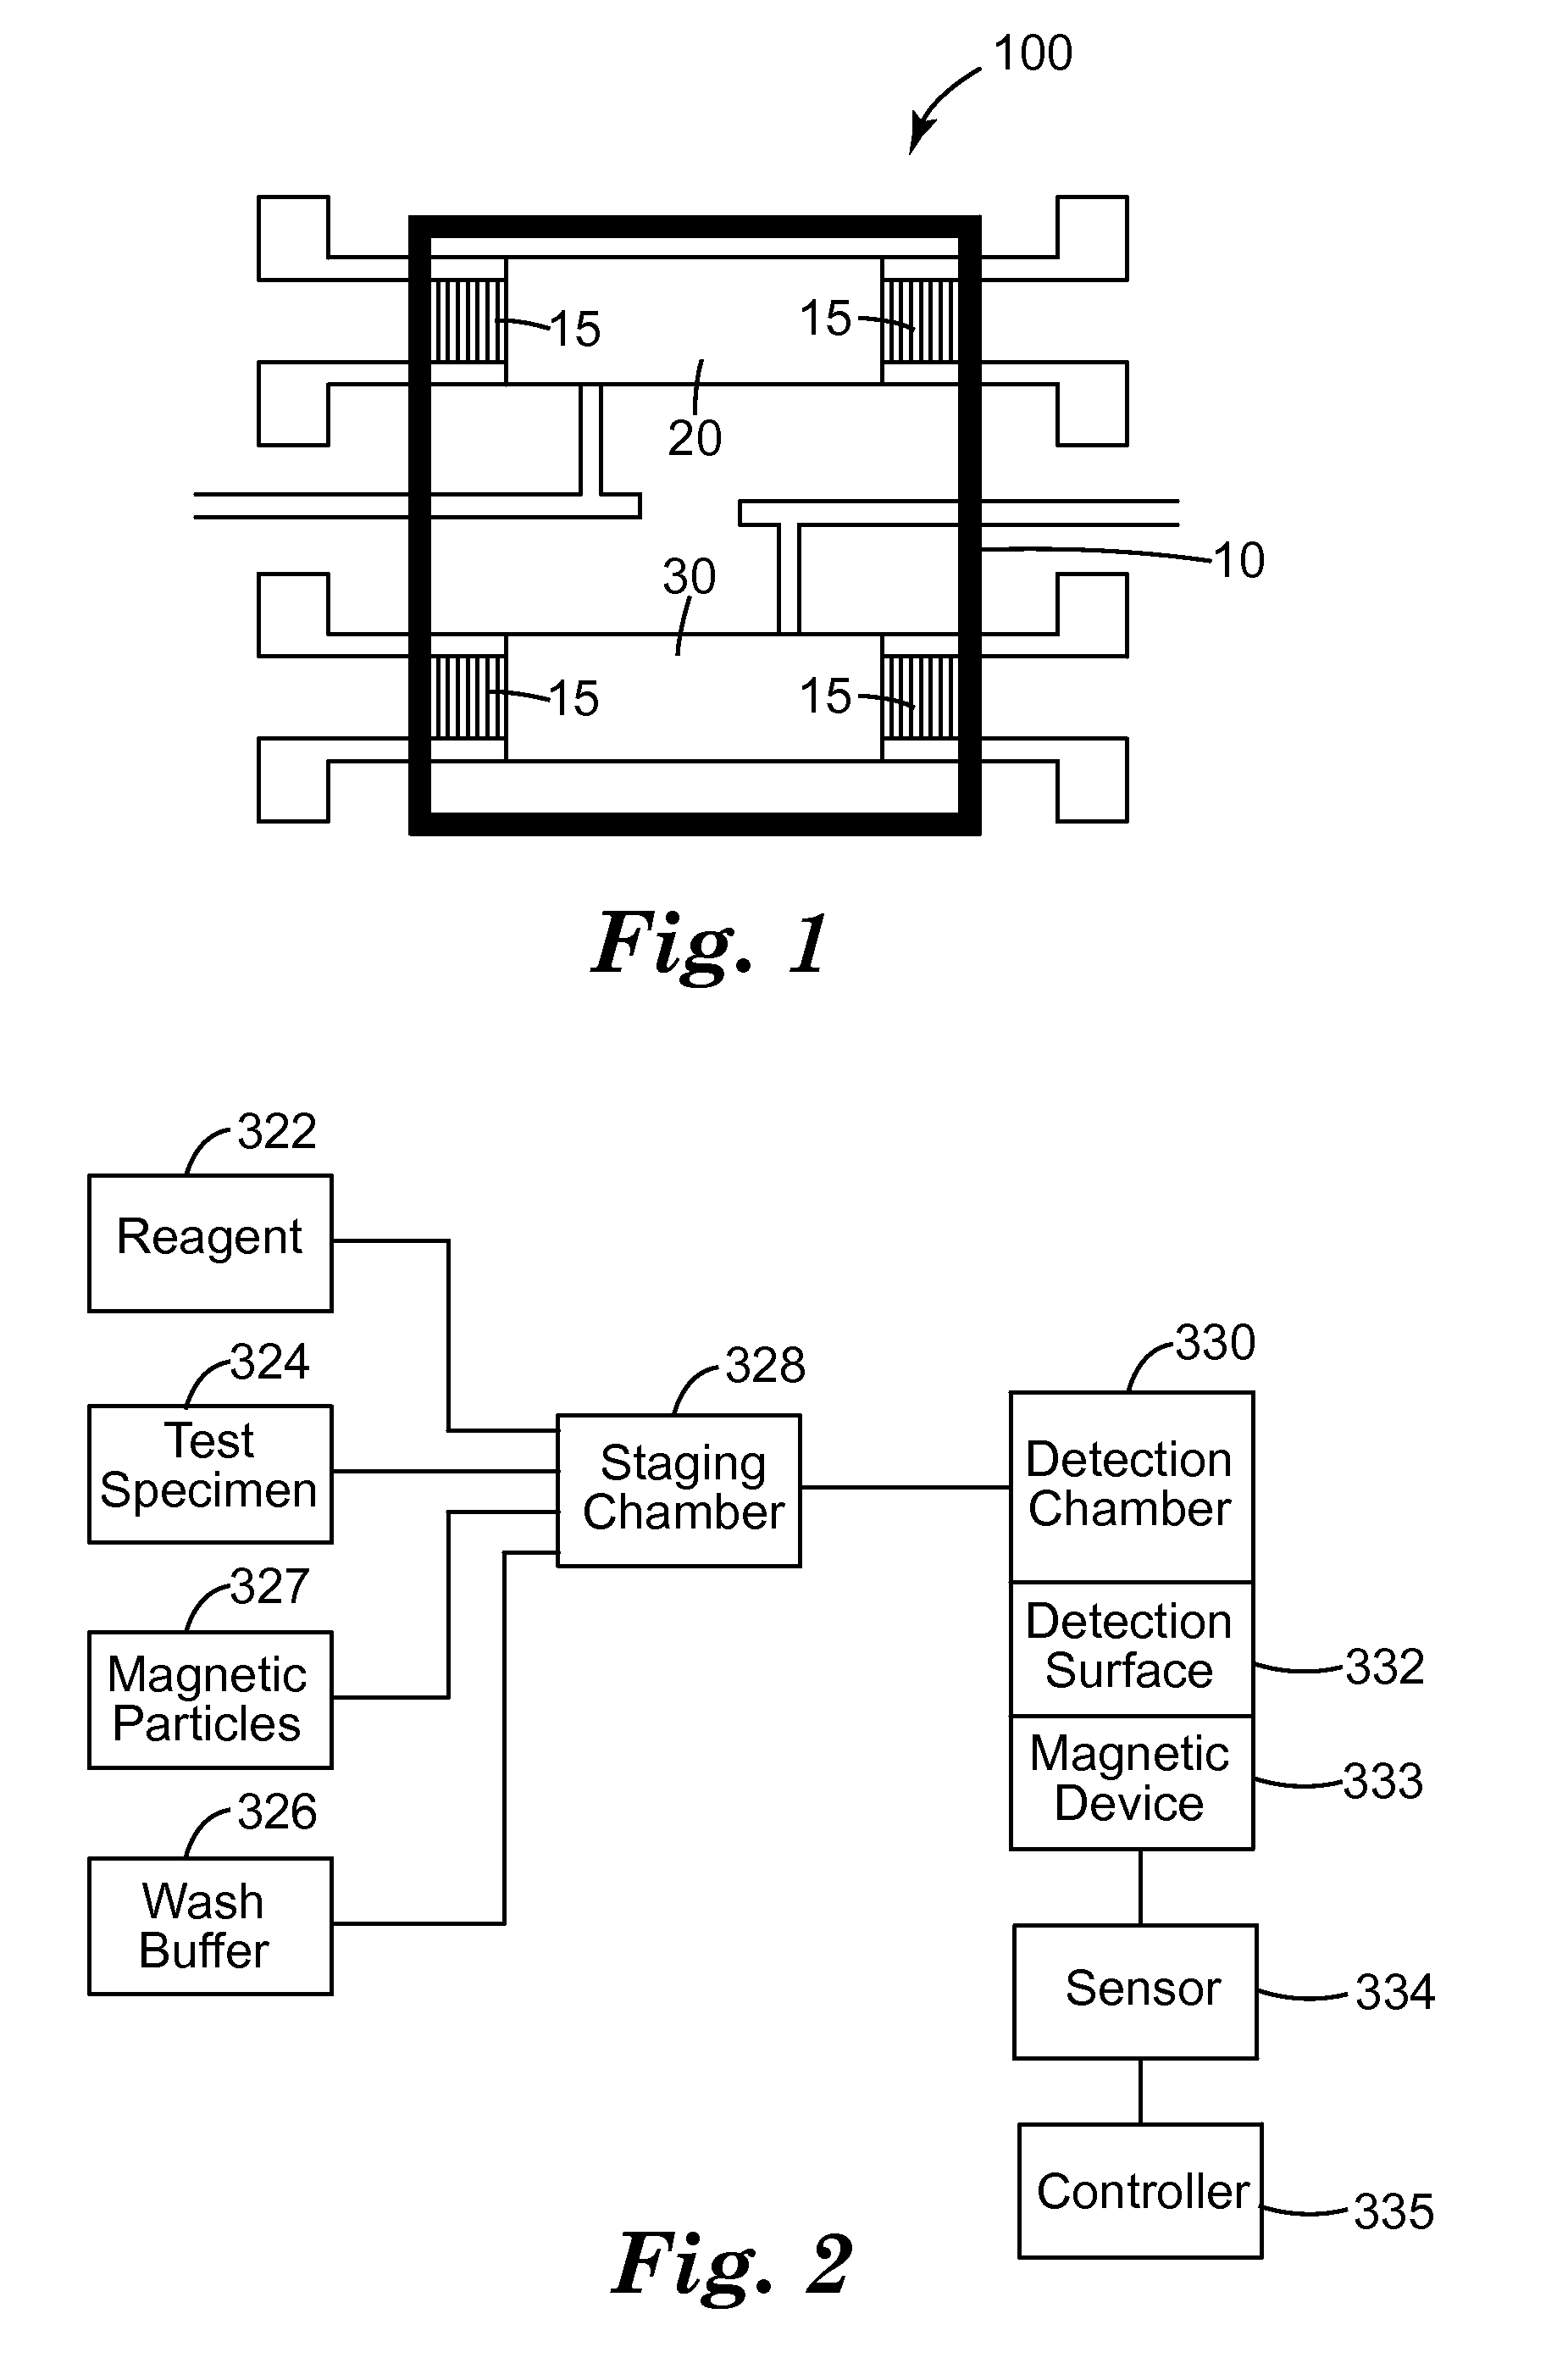 Methods of detection using acousto-mechanical detection systems